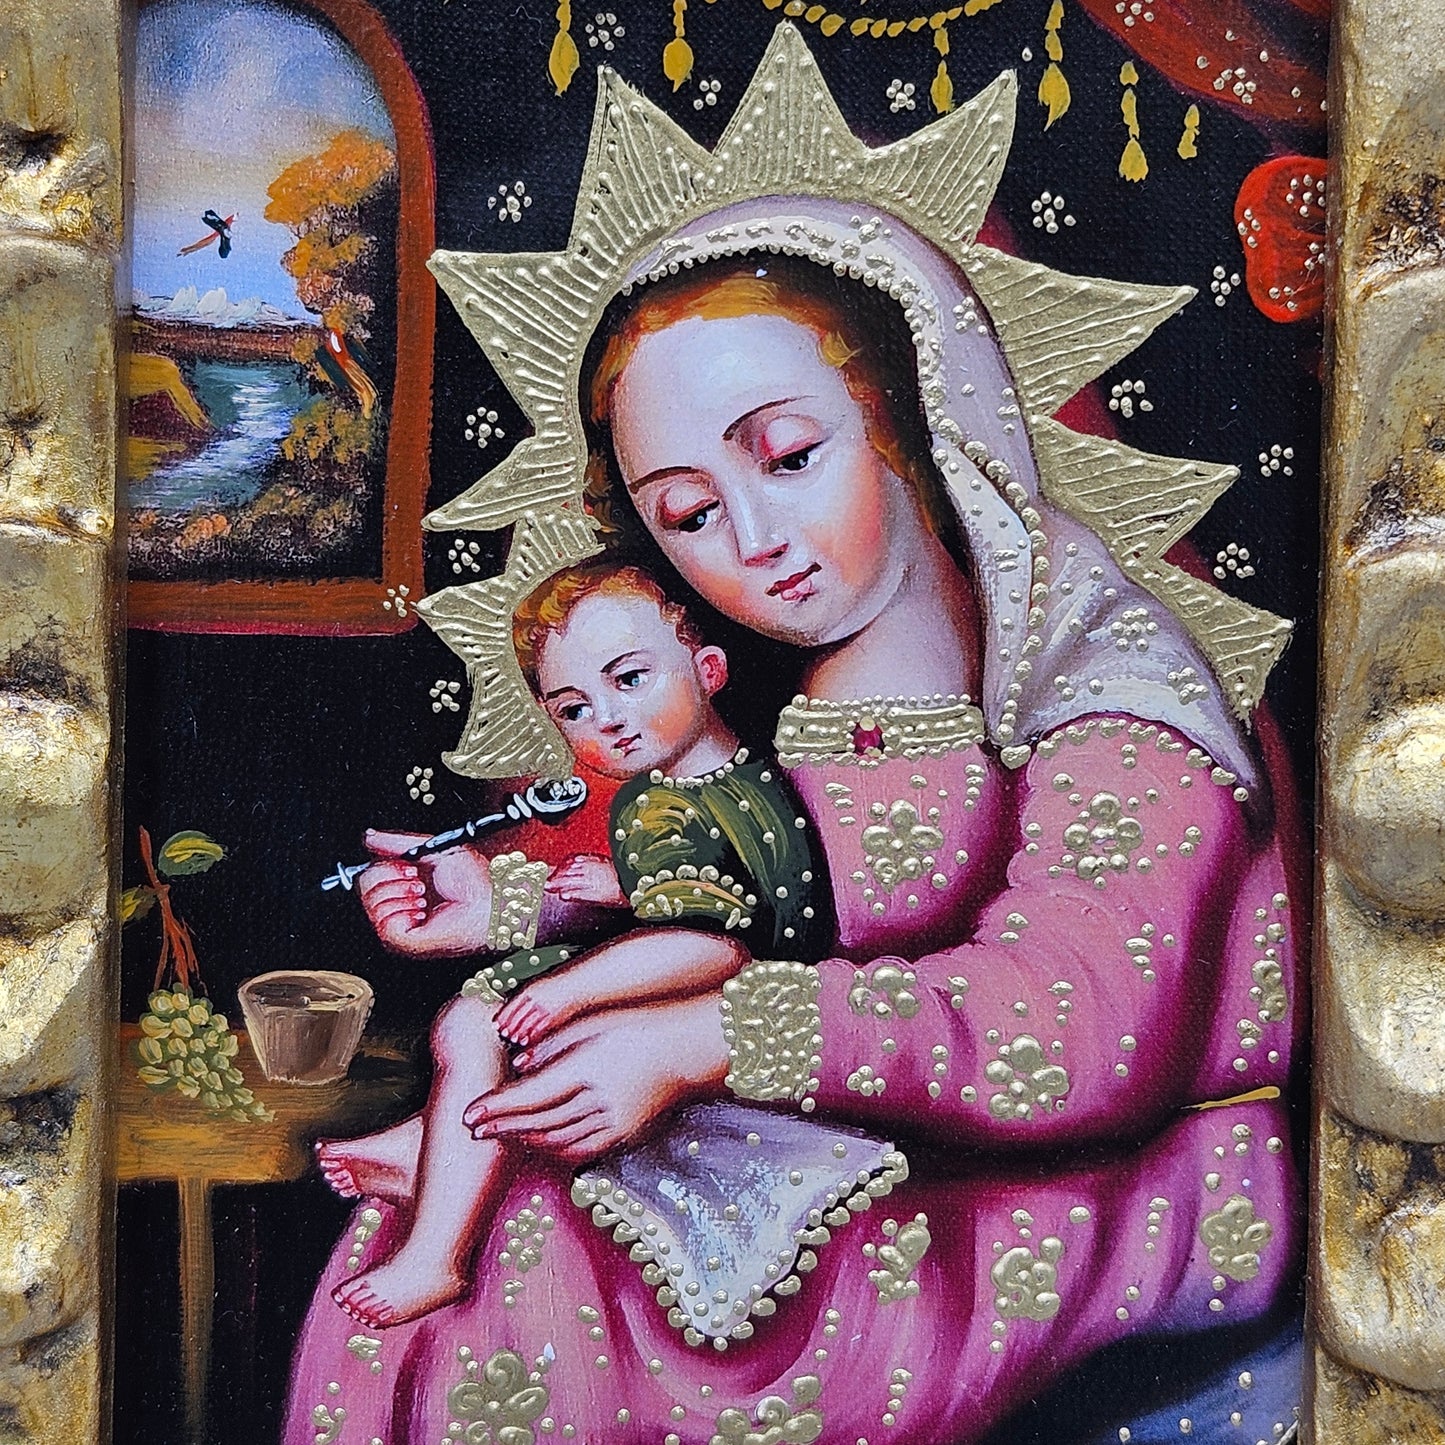 Handcarved Gilt Wood Framed Painting on Board of Madonna of The Spoon Religious Icon